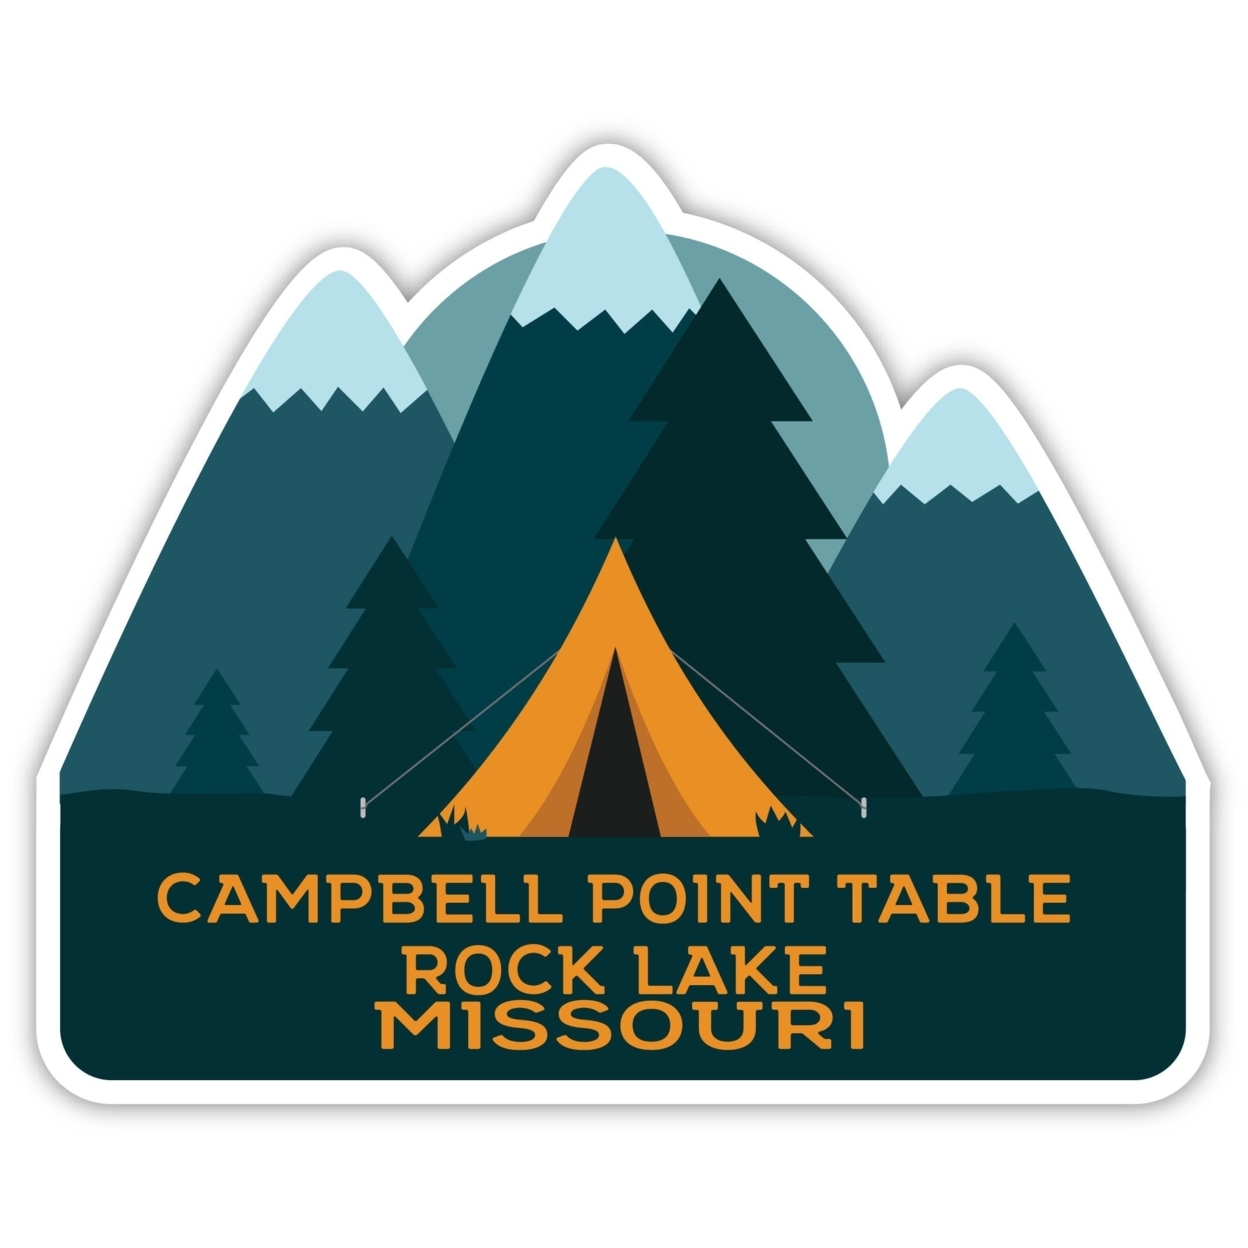 Campbell Point Table Rock Lake Missouri Souvenir Decorative Stickers (Choose Theme And Size) - 4-Pack, 12-Inch, Tent